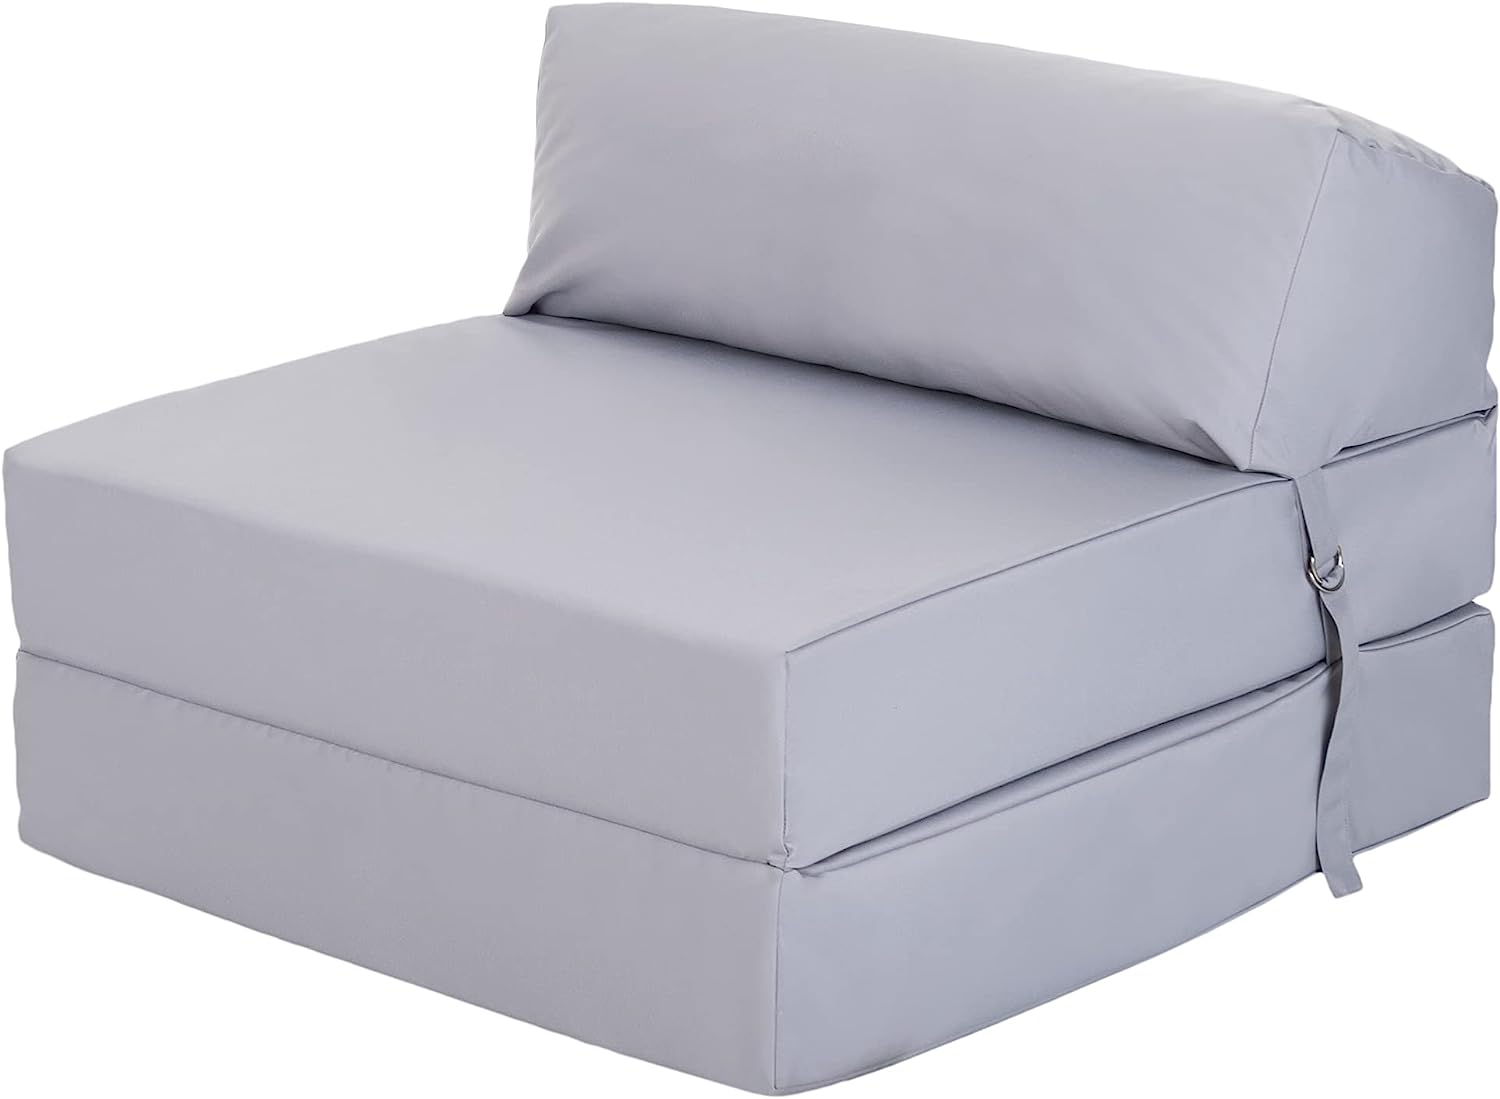 Fold Out Z-Bed Chair Silver Cover